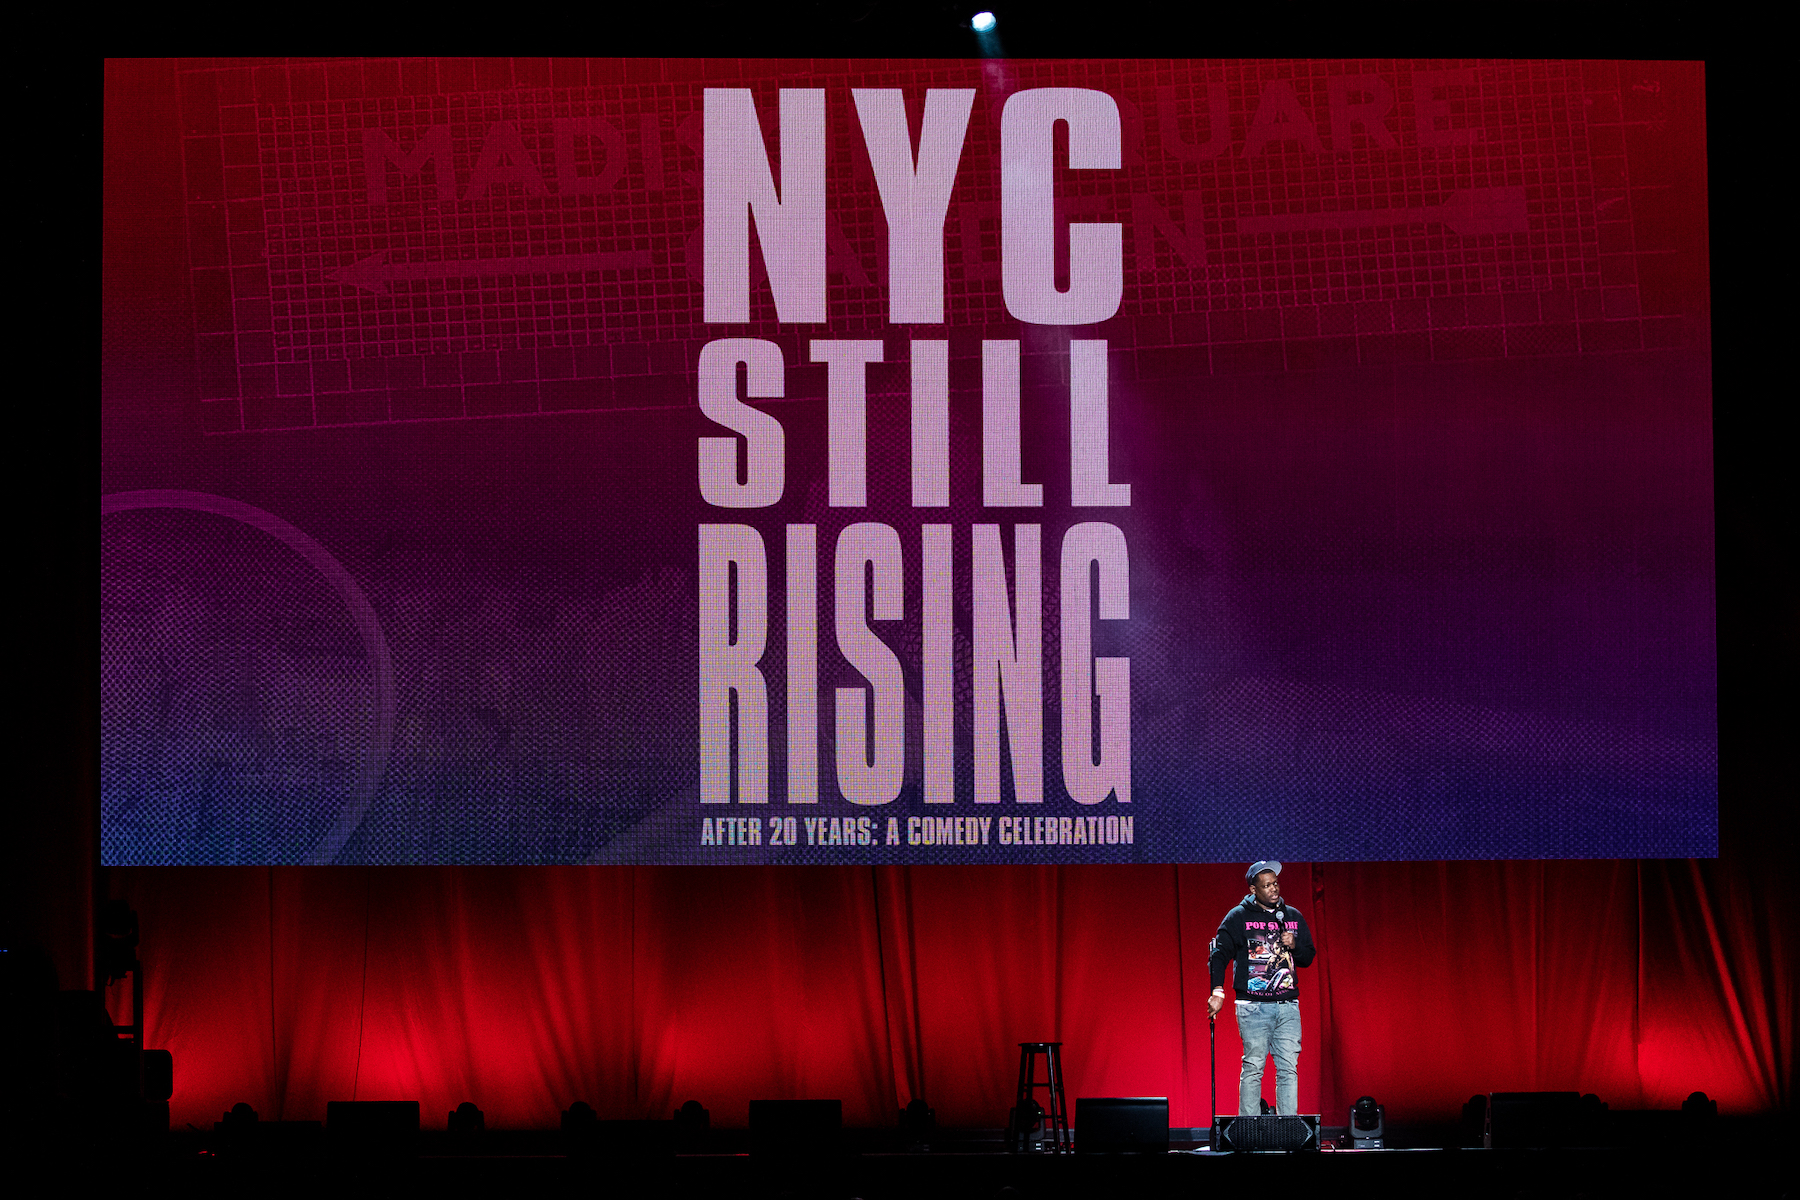 Photo 3 in 'NYC STILL RISING After 20 years:  A Comedy Celebration' gallery showcasing lighting design by Mike Baldassari of Mike-O-Matic Industries LLC